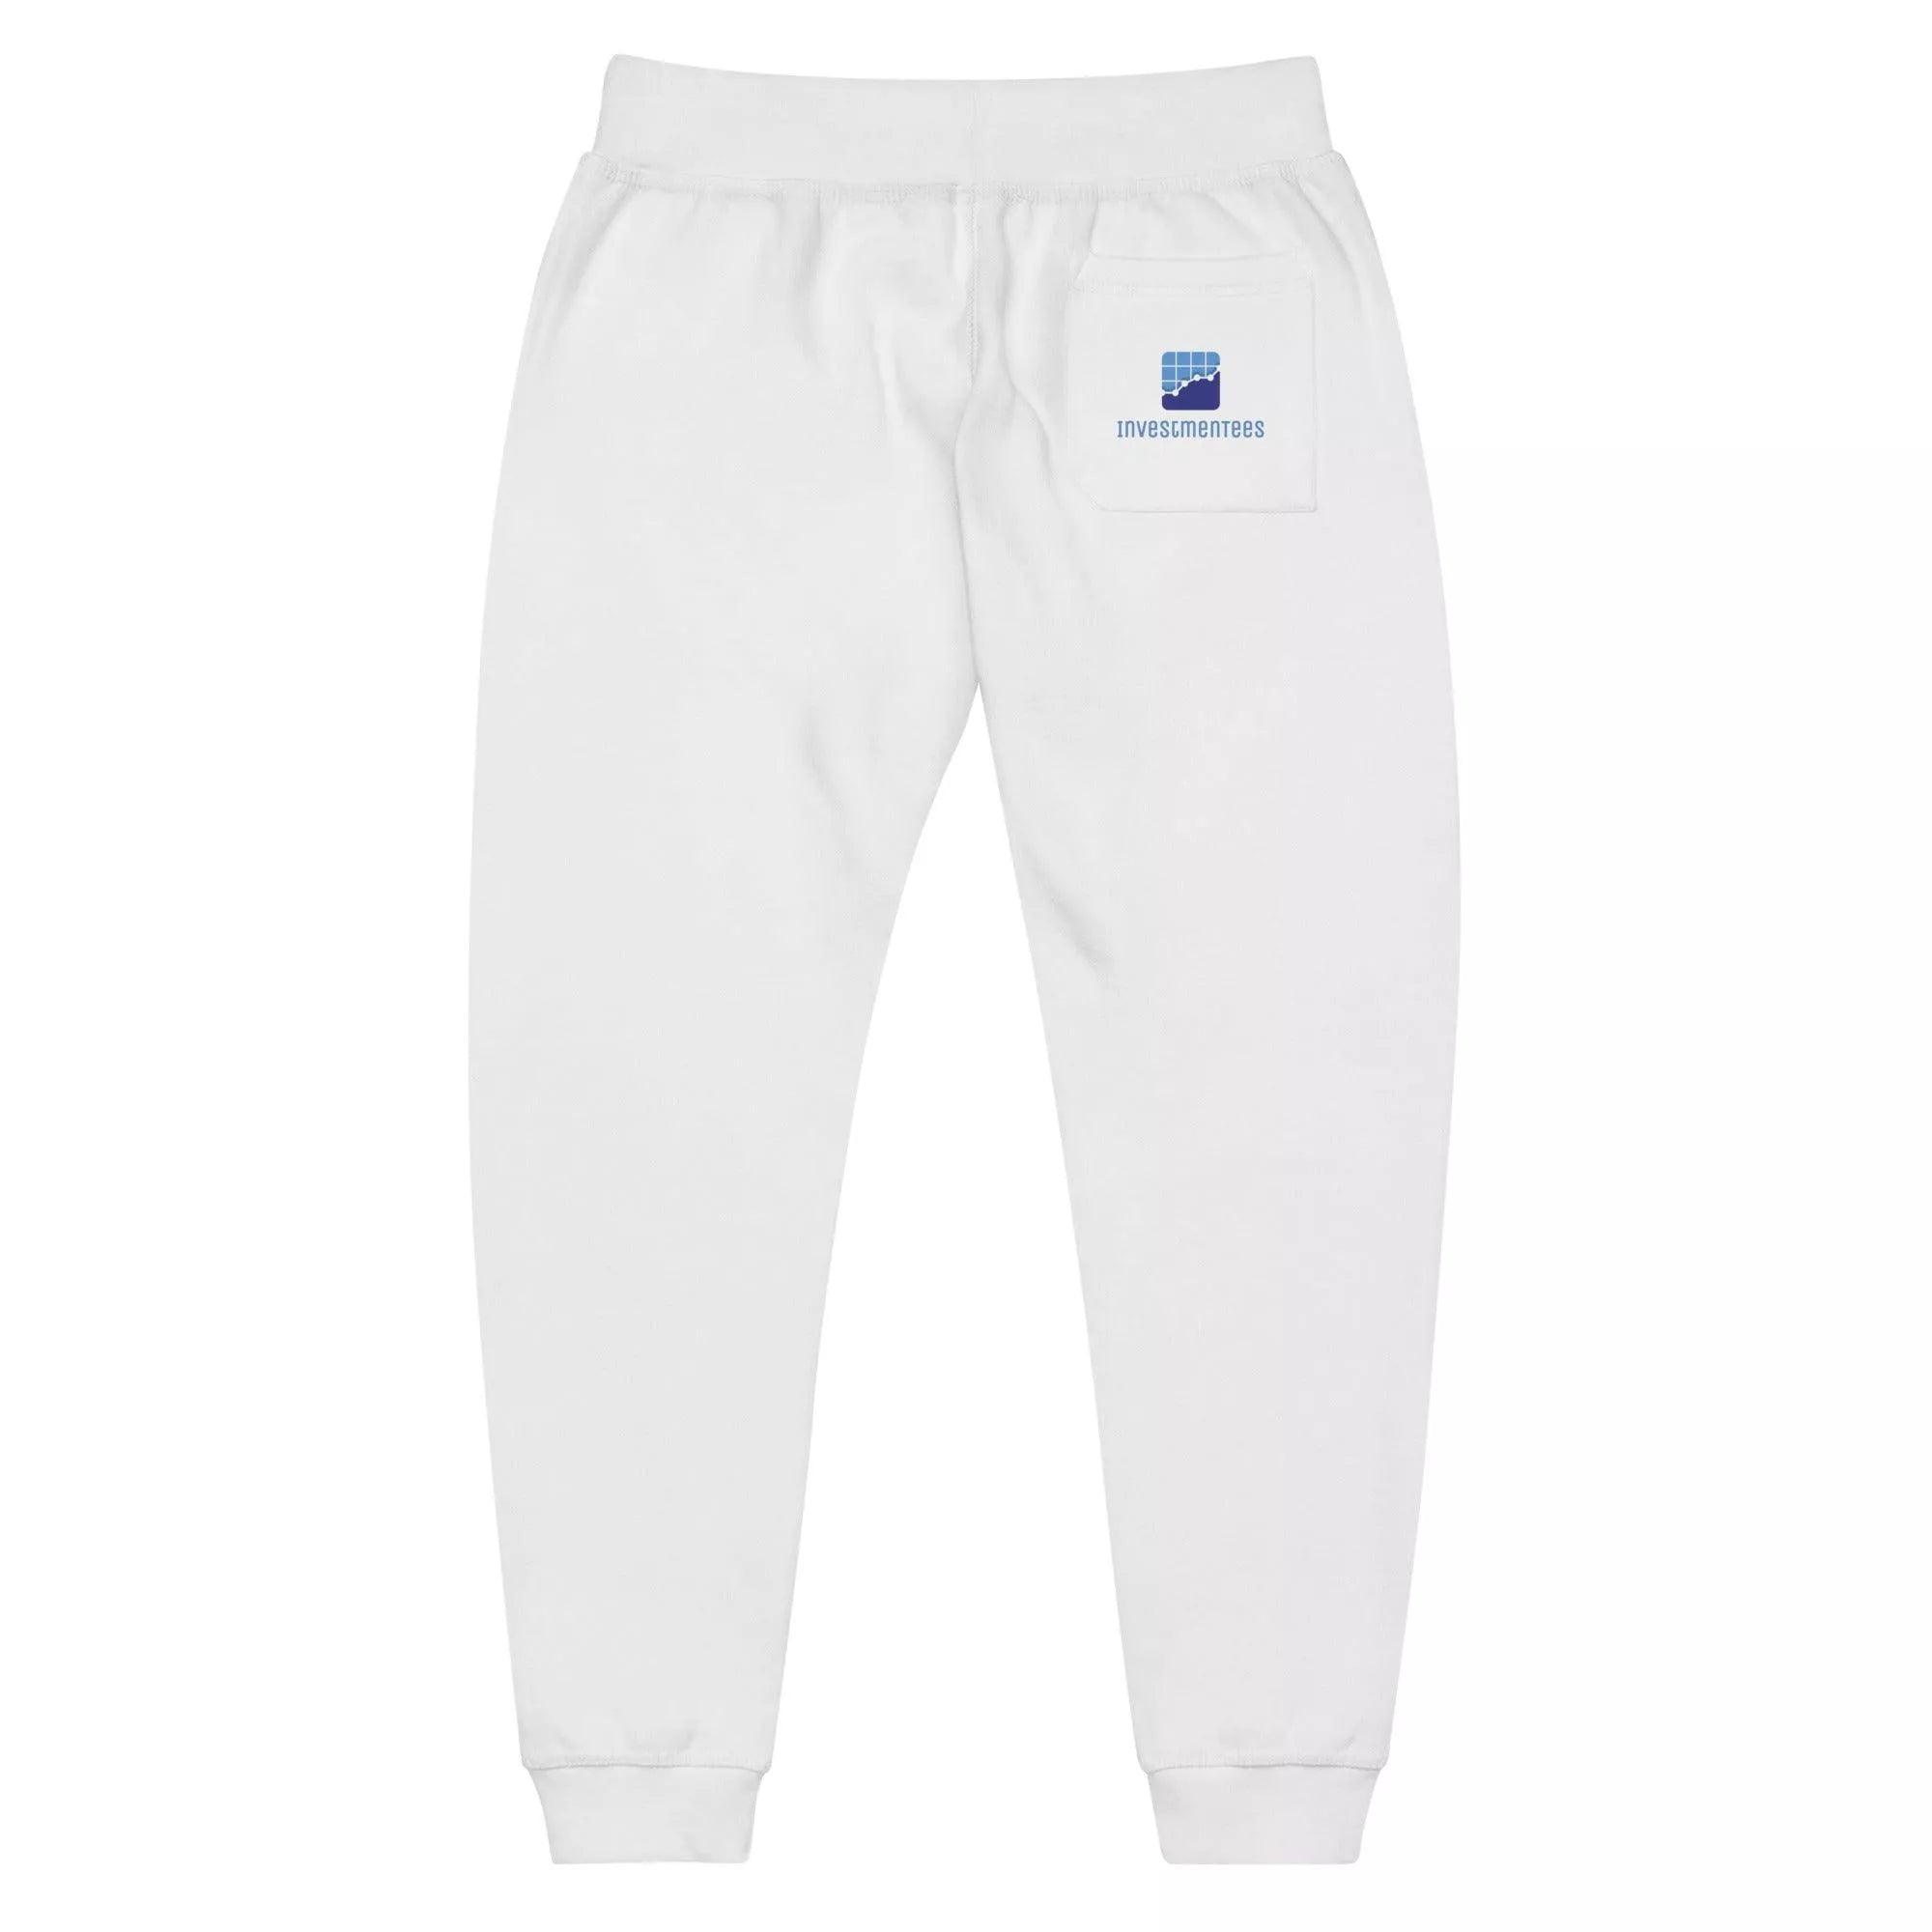 Dividends Sweatpants - InvestmenTees